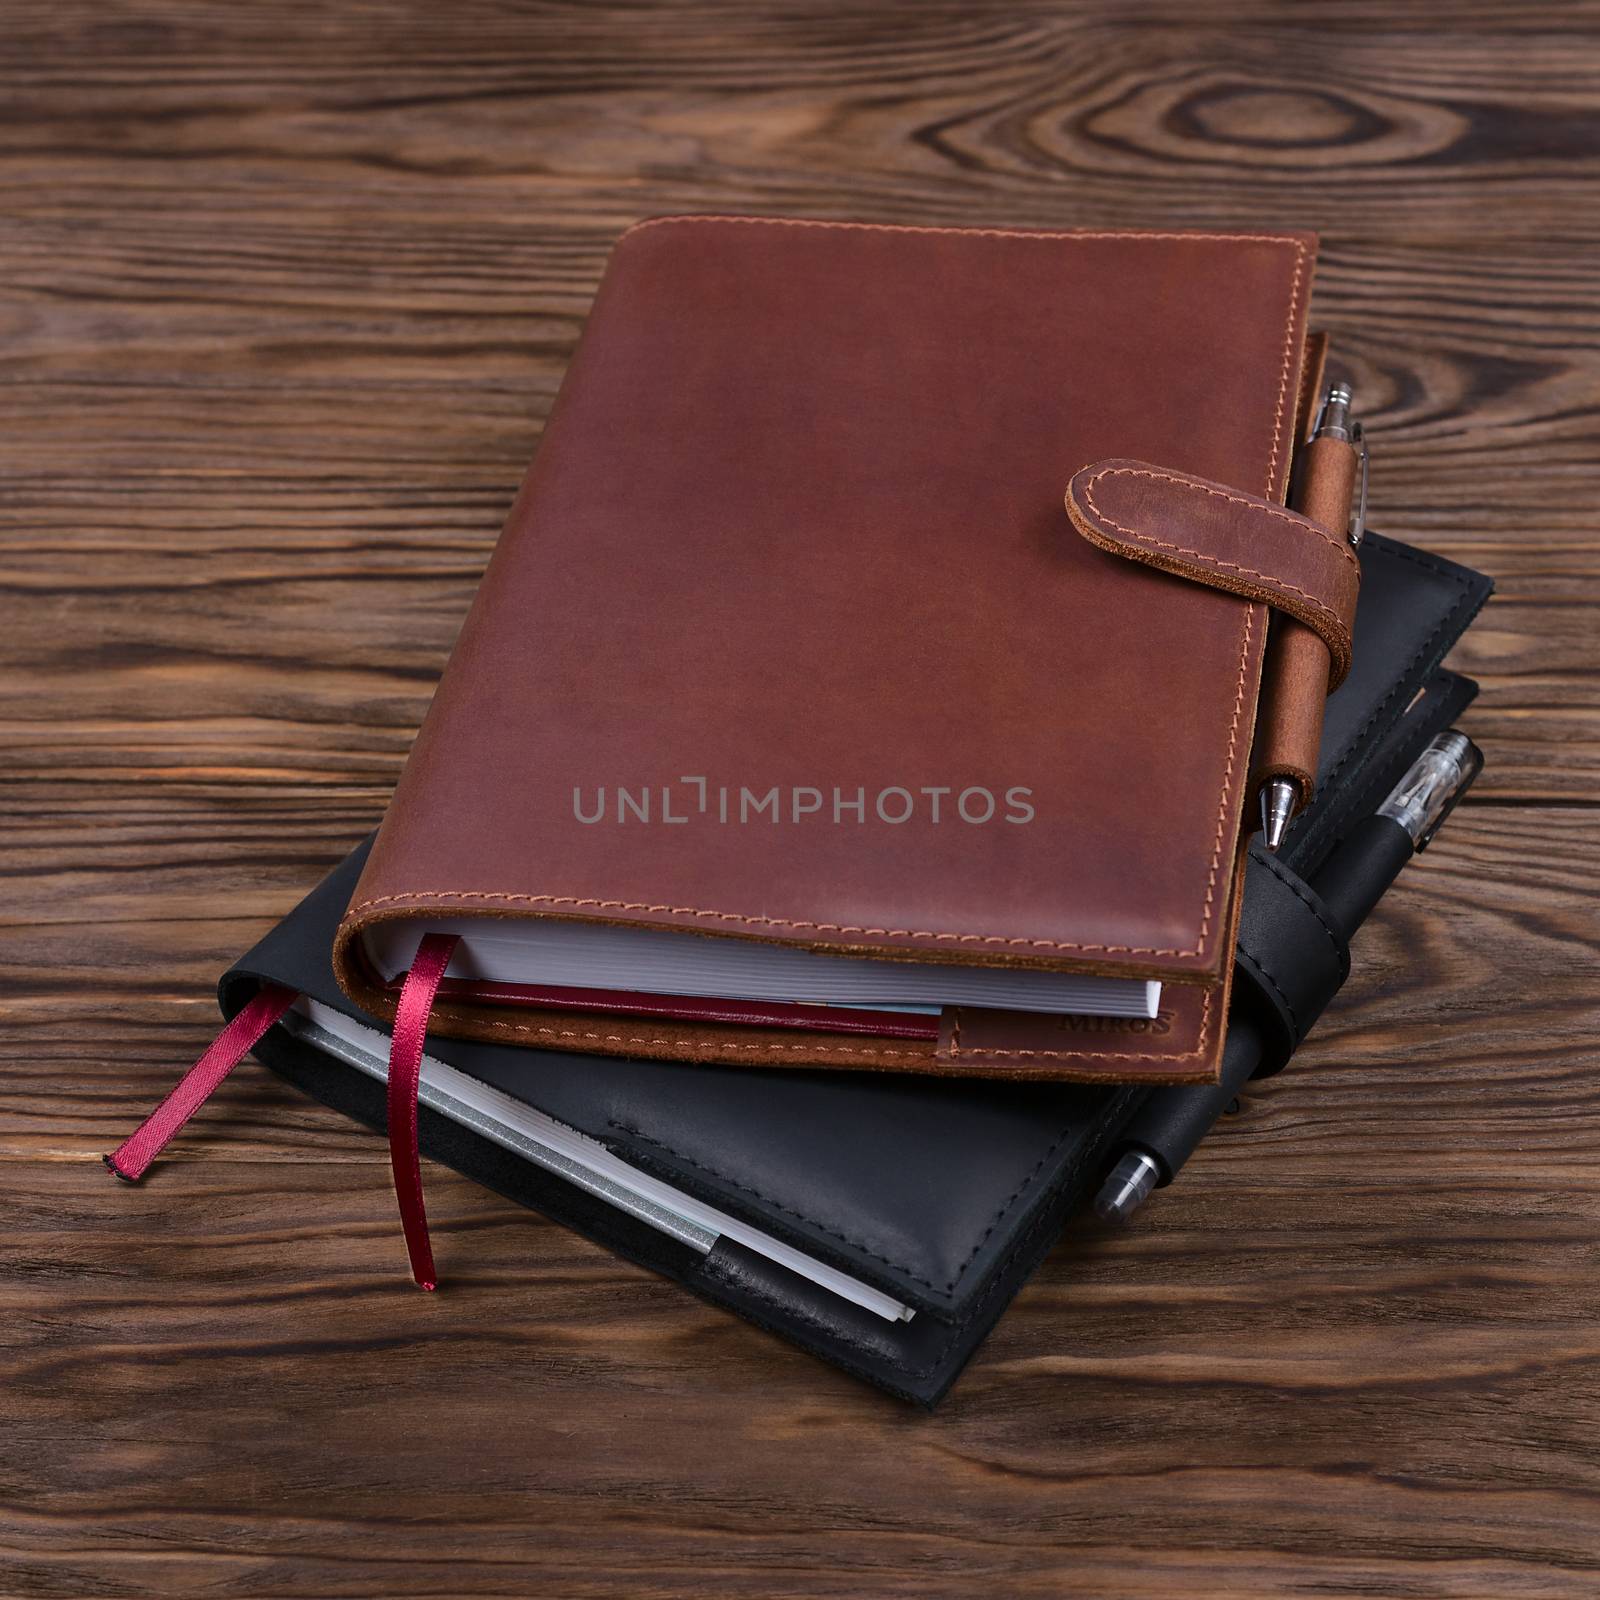 Brown and black handmade leather notebook covers with notebook and pen inside on wooden background. Stock photo of luxury business accessories.